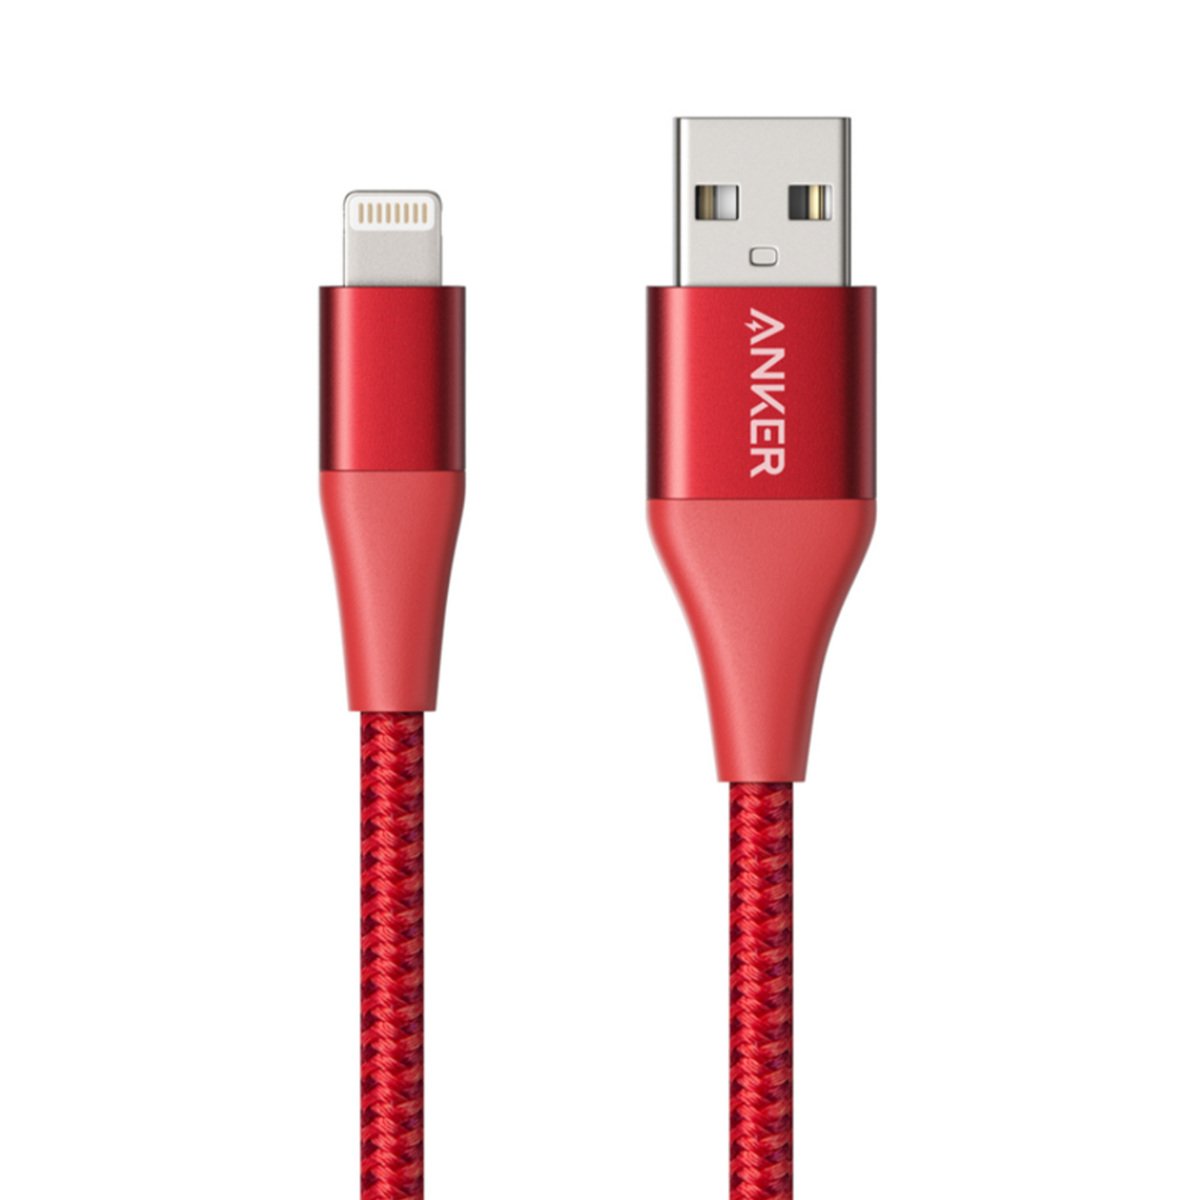 Anker PowerLine+ II Lightning USB Cable A8452H91 Red